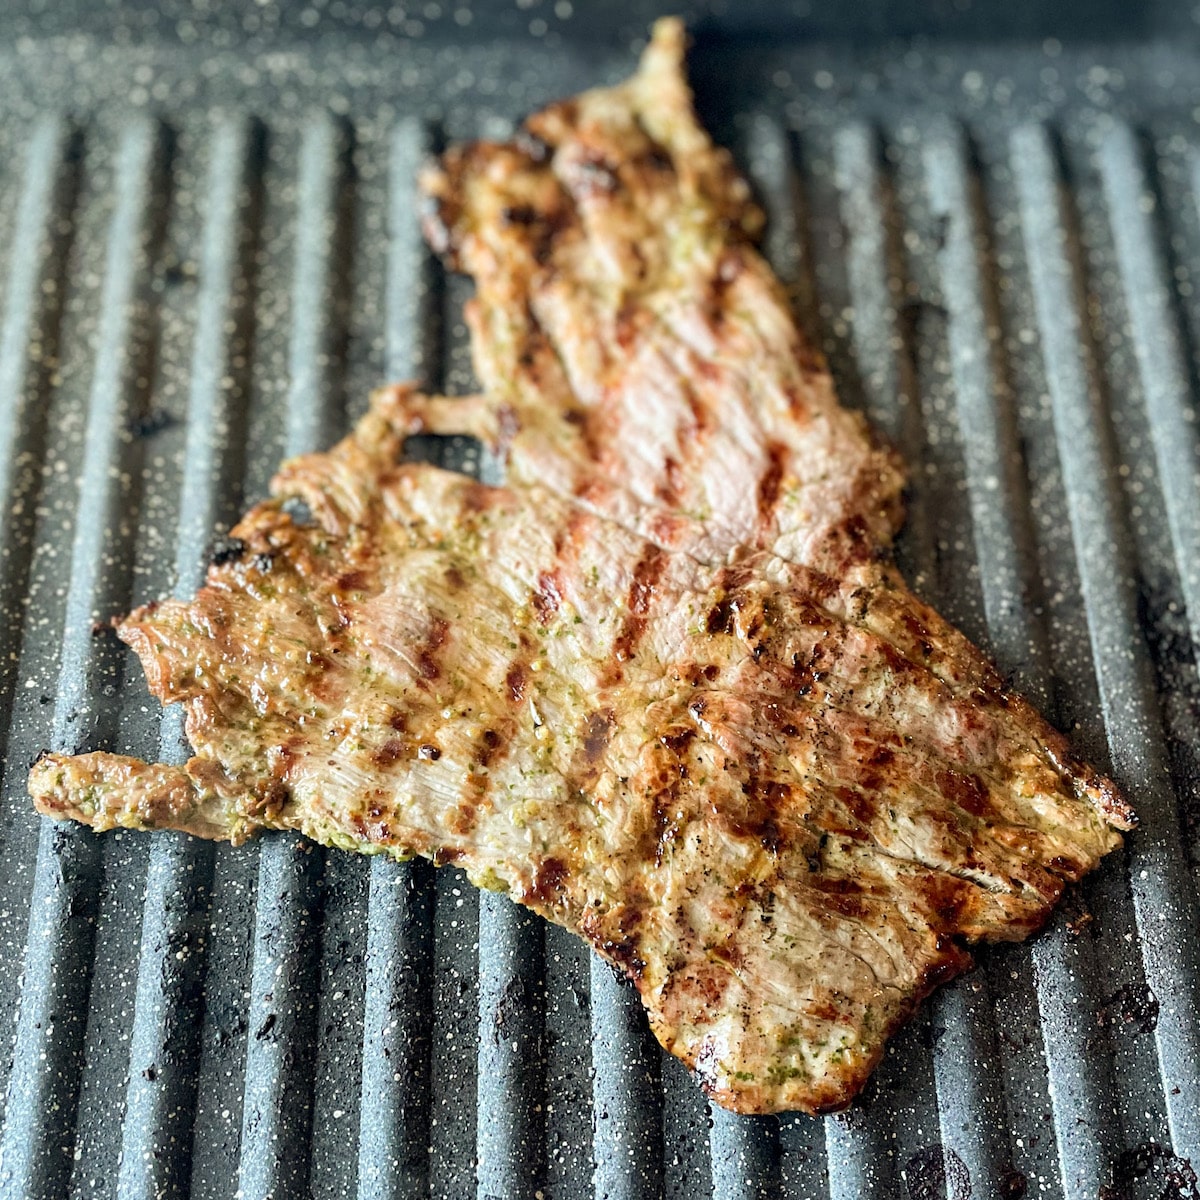 Ranchera meat with grill marks is shown cooking on a grill pan.